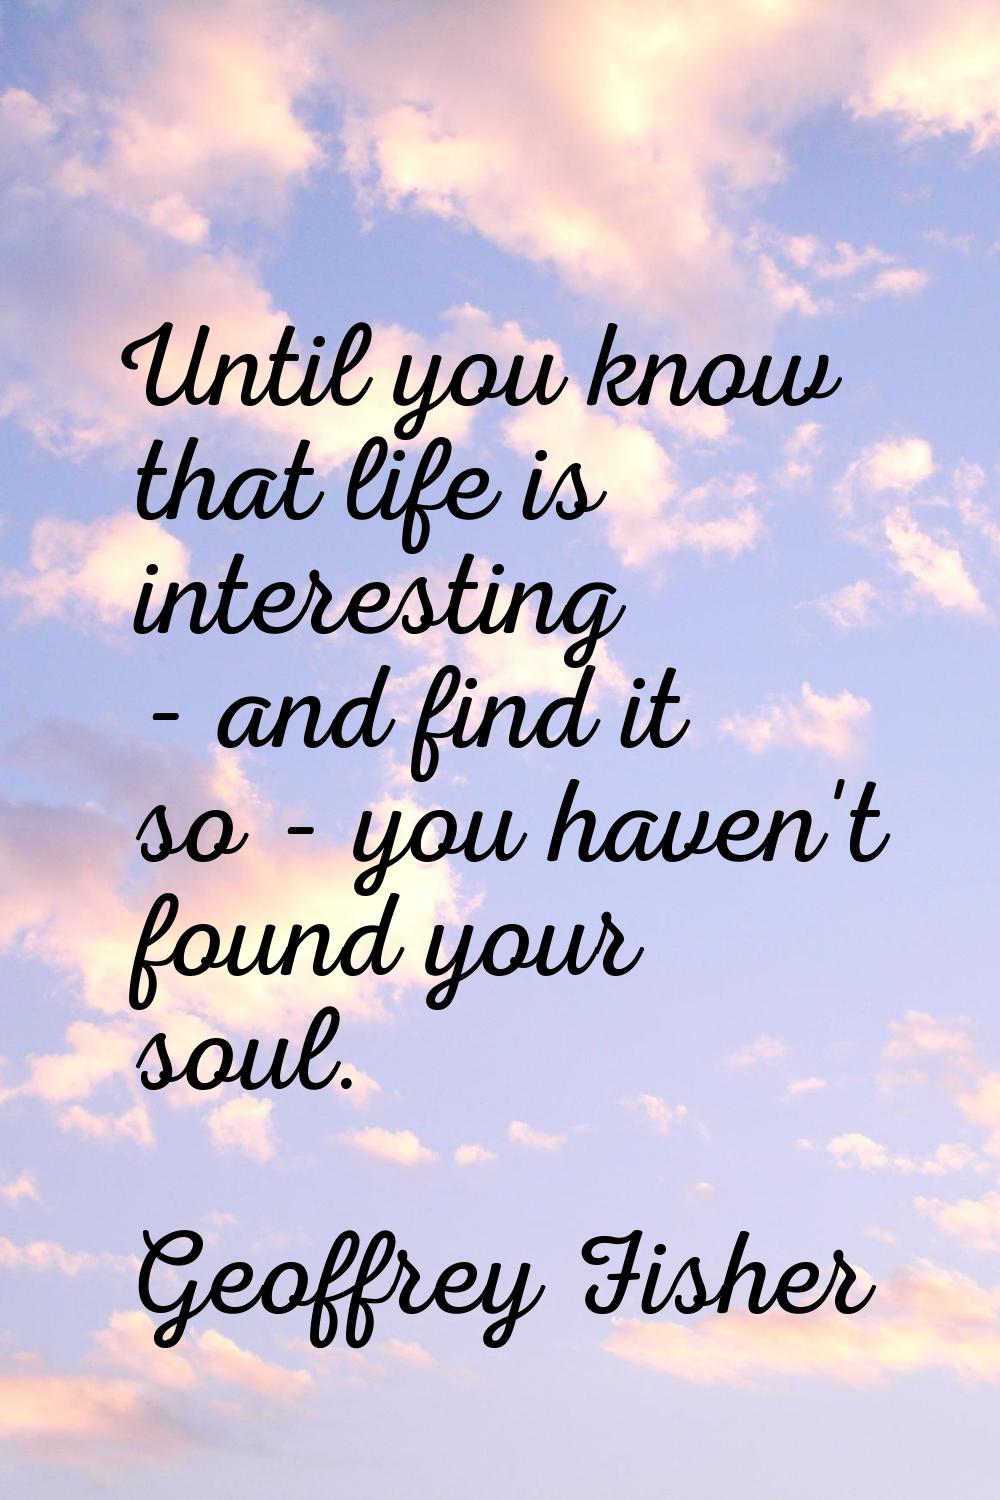 Until you know that life is interesting - and find it so - you haven't found your soul.